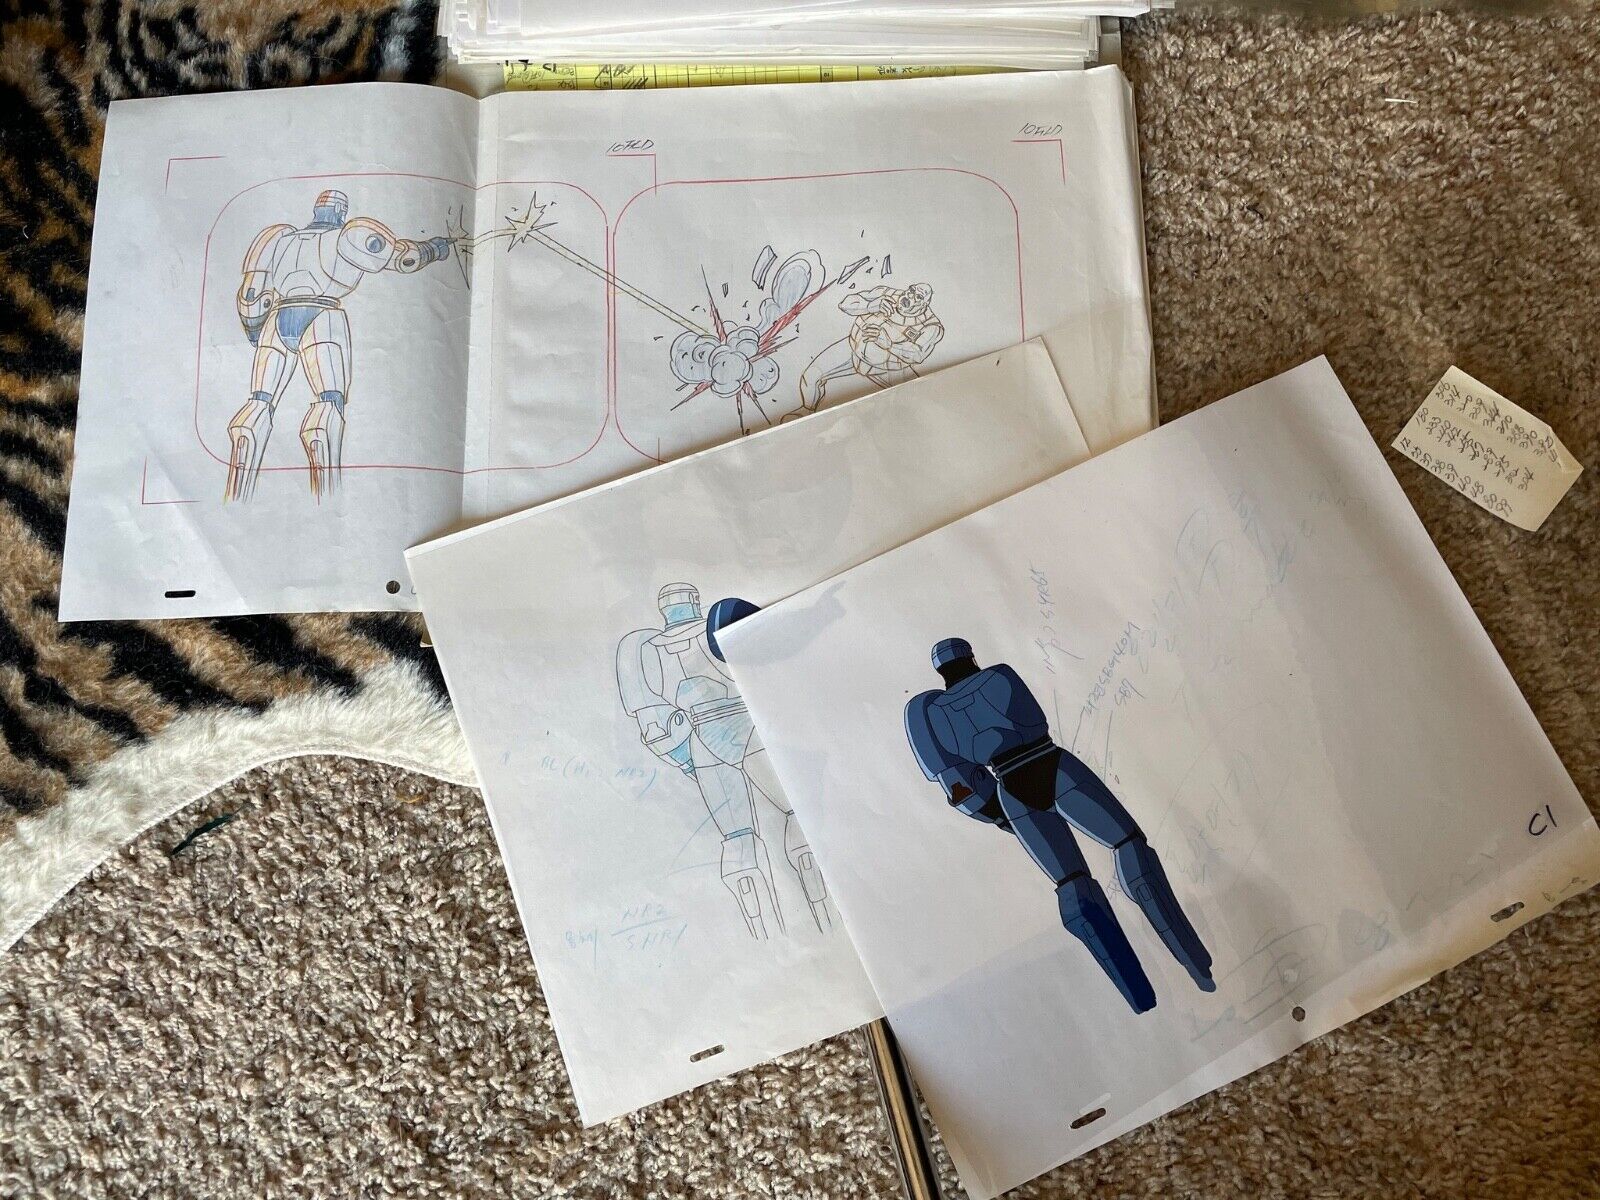 100+ RoboCop Animation Production Cels & Drawings Cartoon Illustration Anime 80s